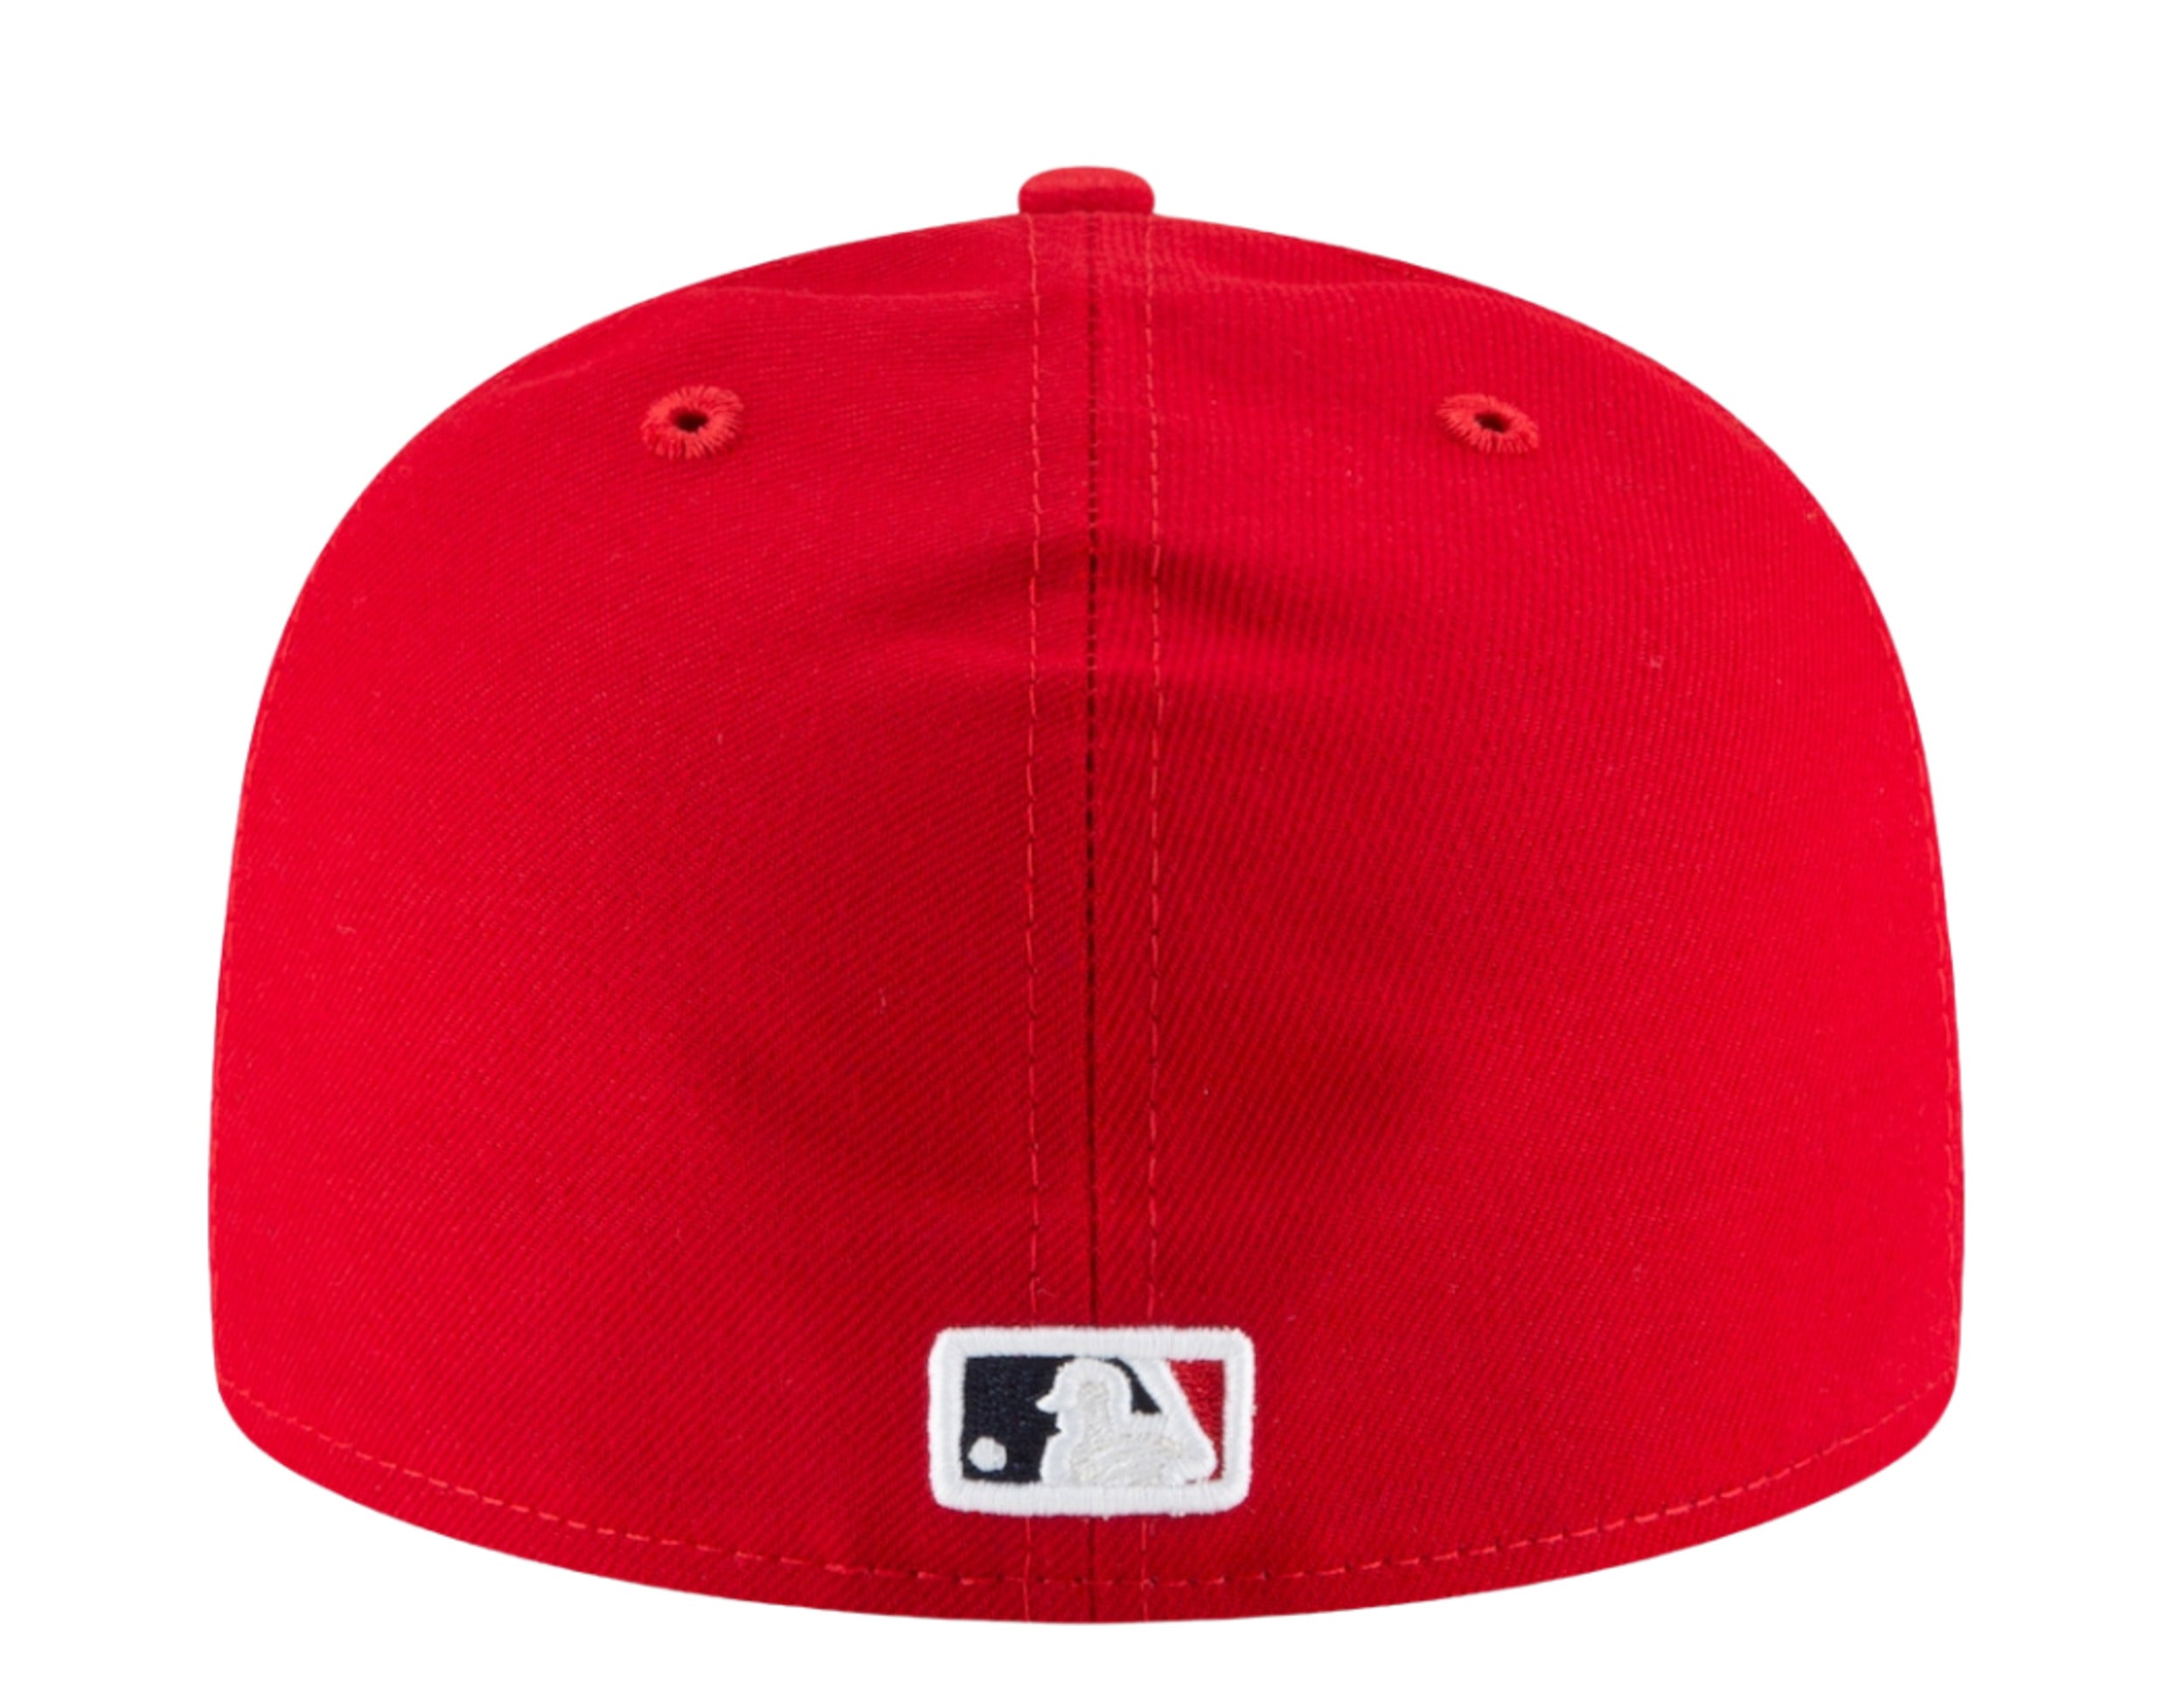 Shohei Ohtani Hat 2021 MLB Los Angeles Angels New Era Fitted Hat